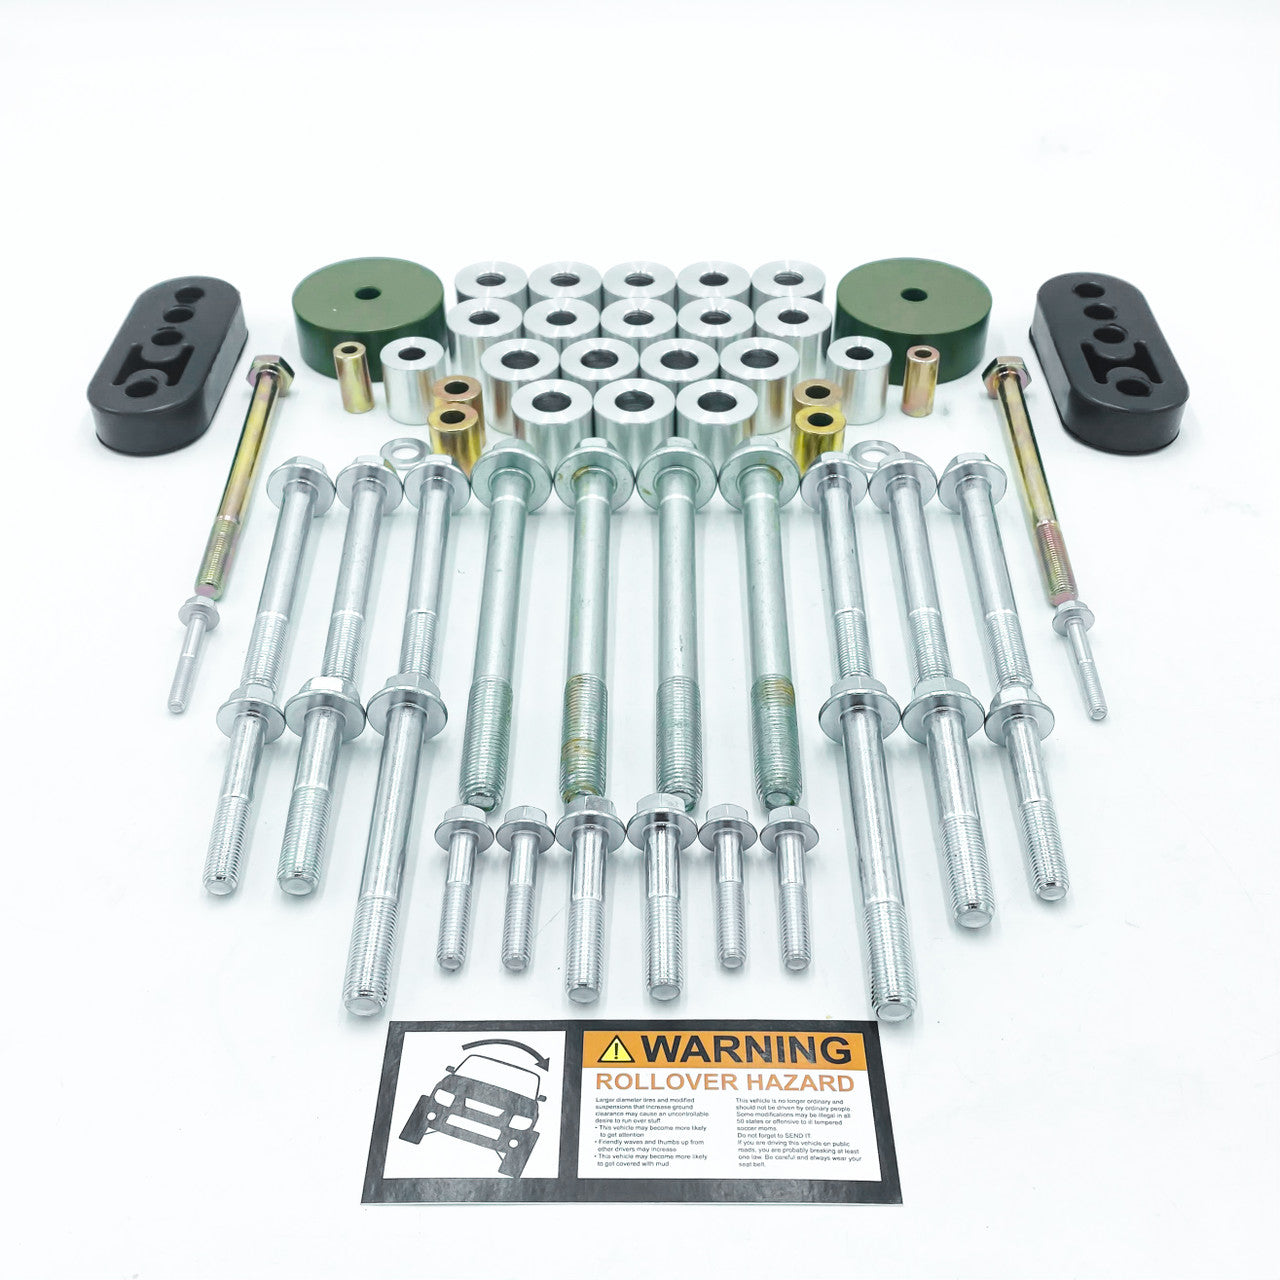 Ninth Element Complete Cross Country Lift Kit